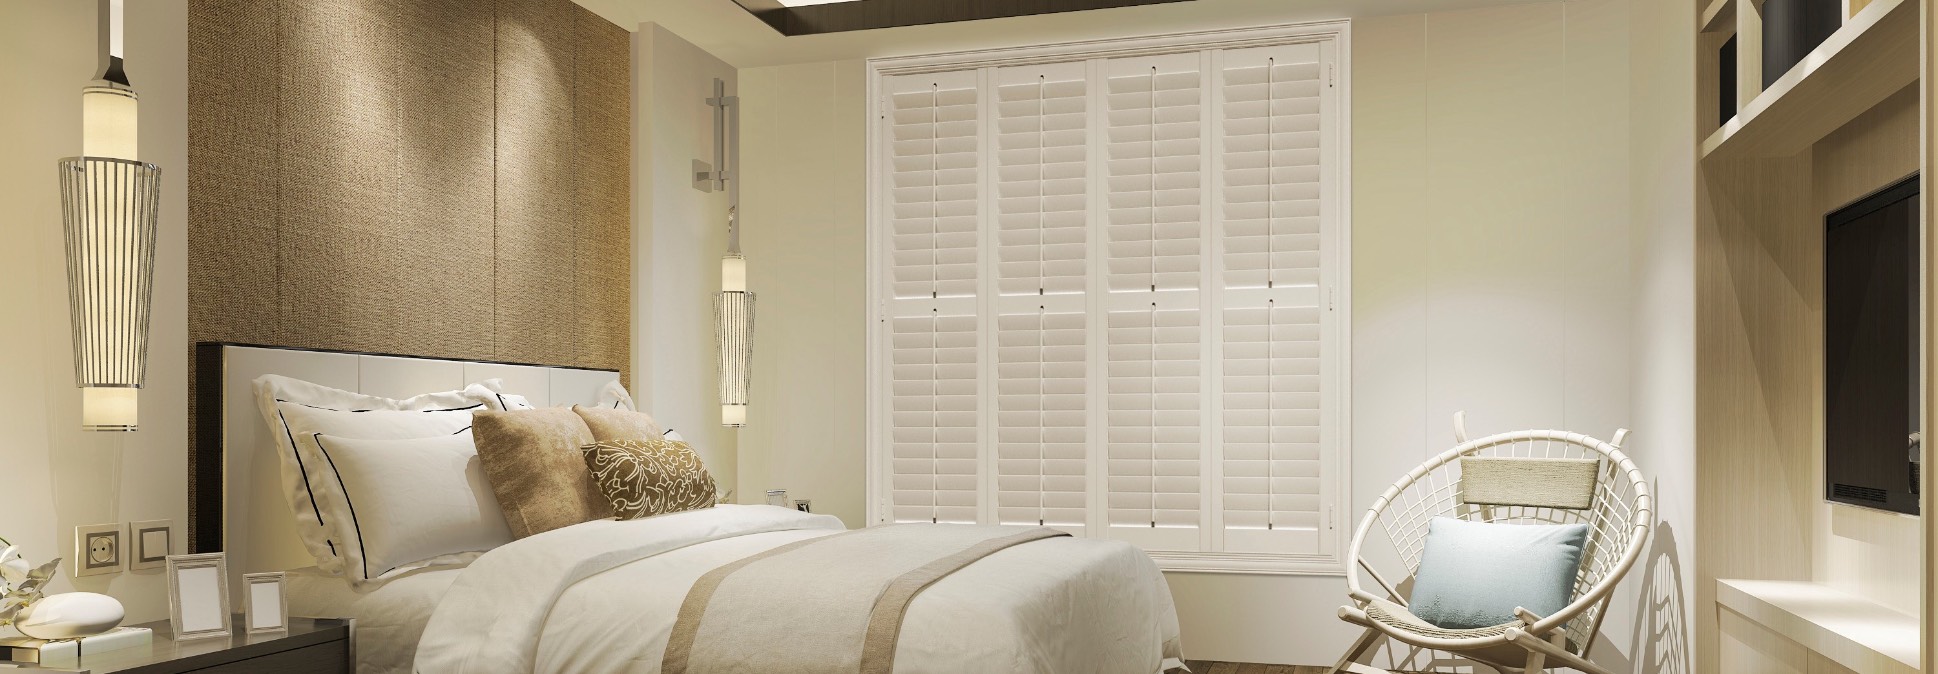 Polywood shutters in a bedroom